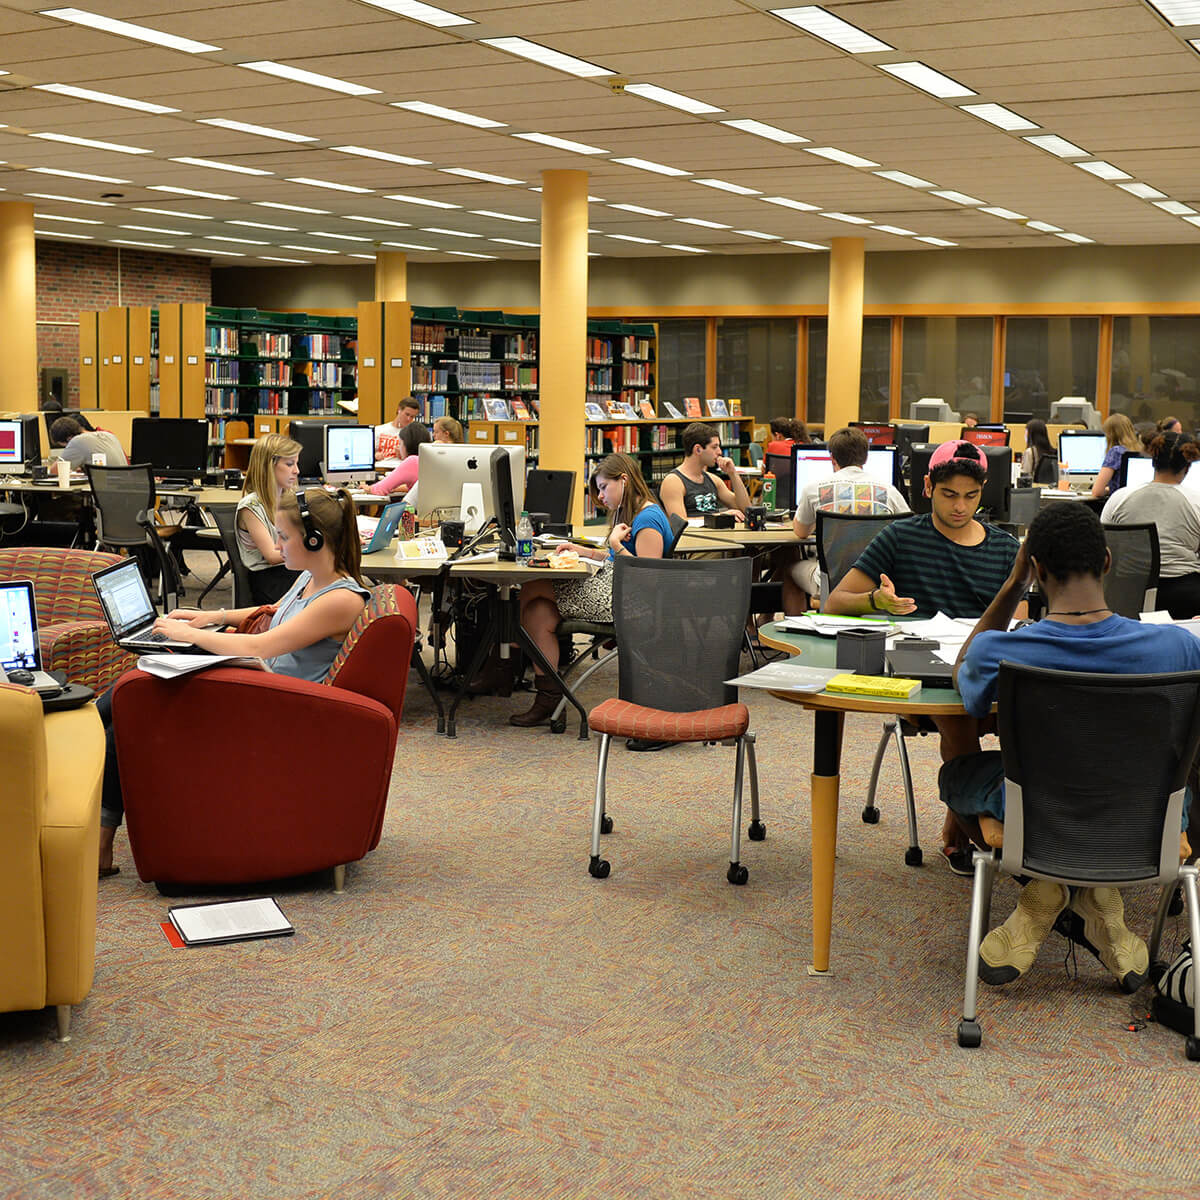 A large group of students studying and working in the library.